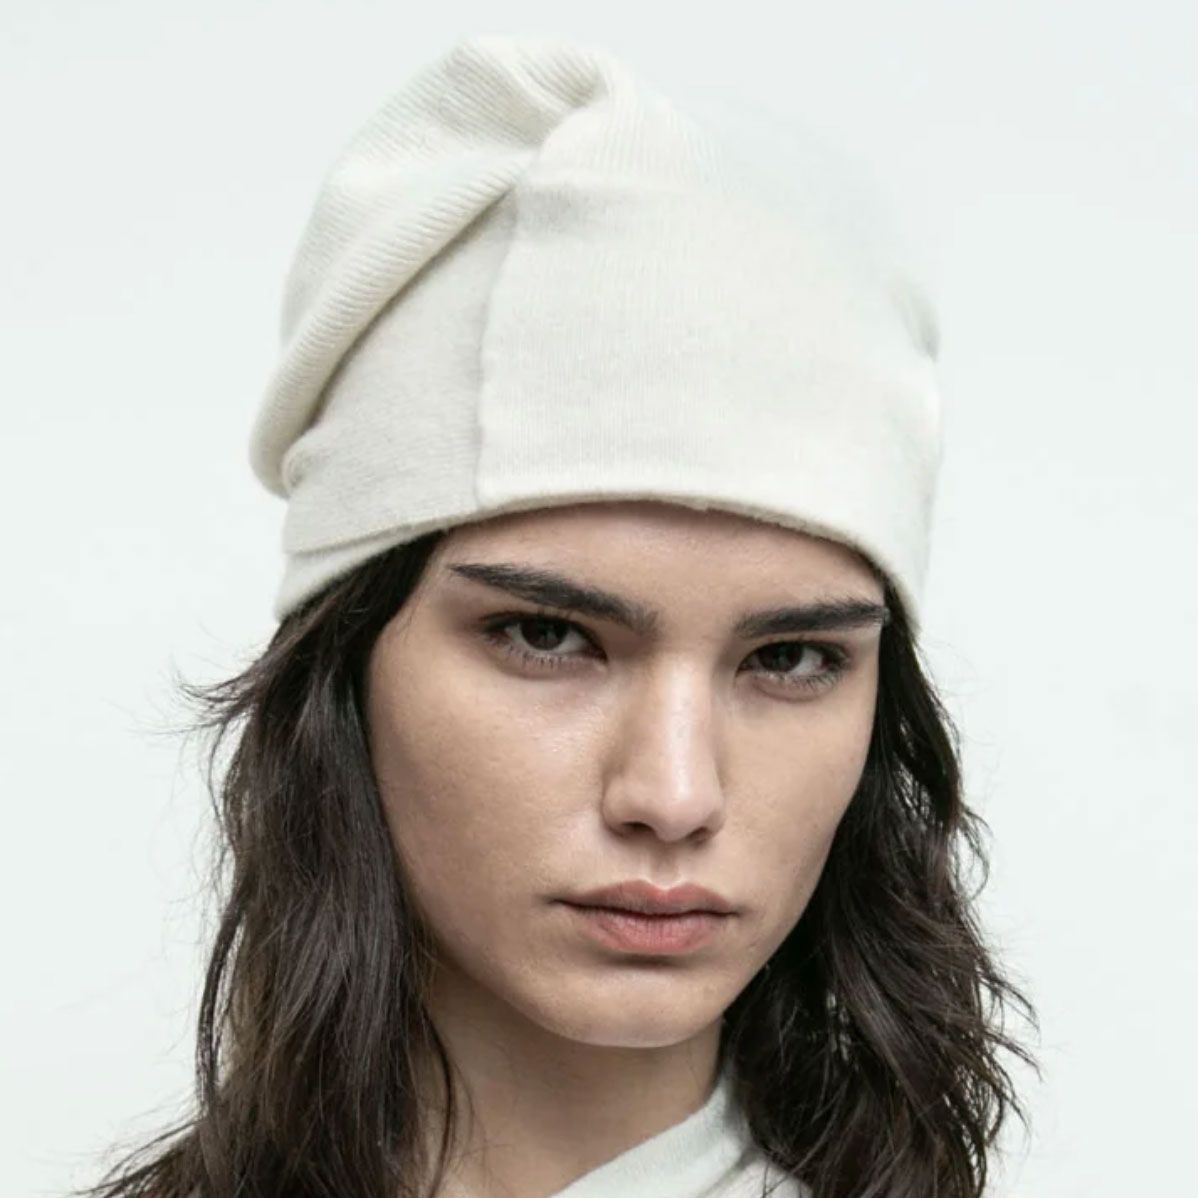 How to Wear the Funny Little Hats We Saw on the Runway